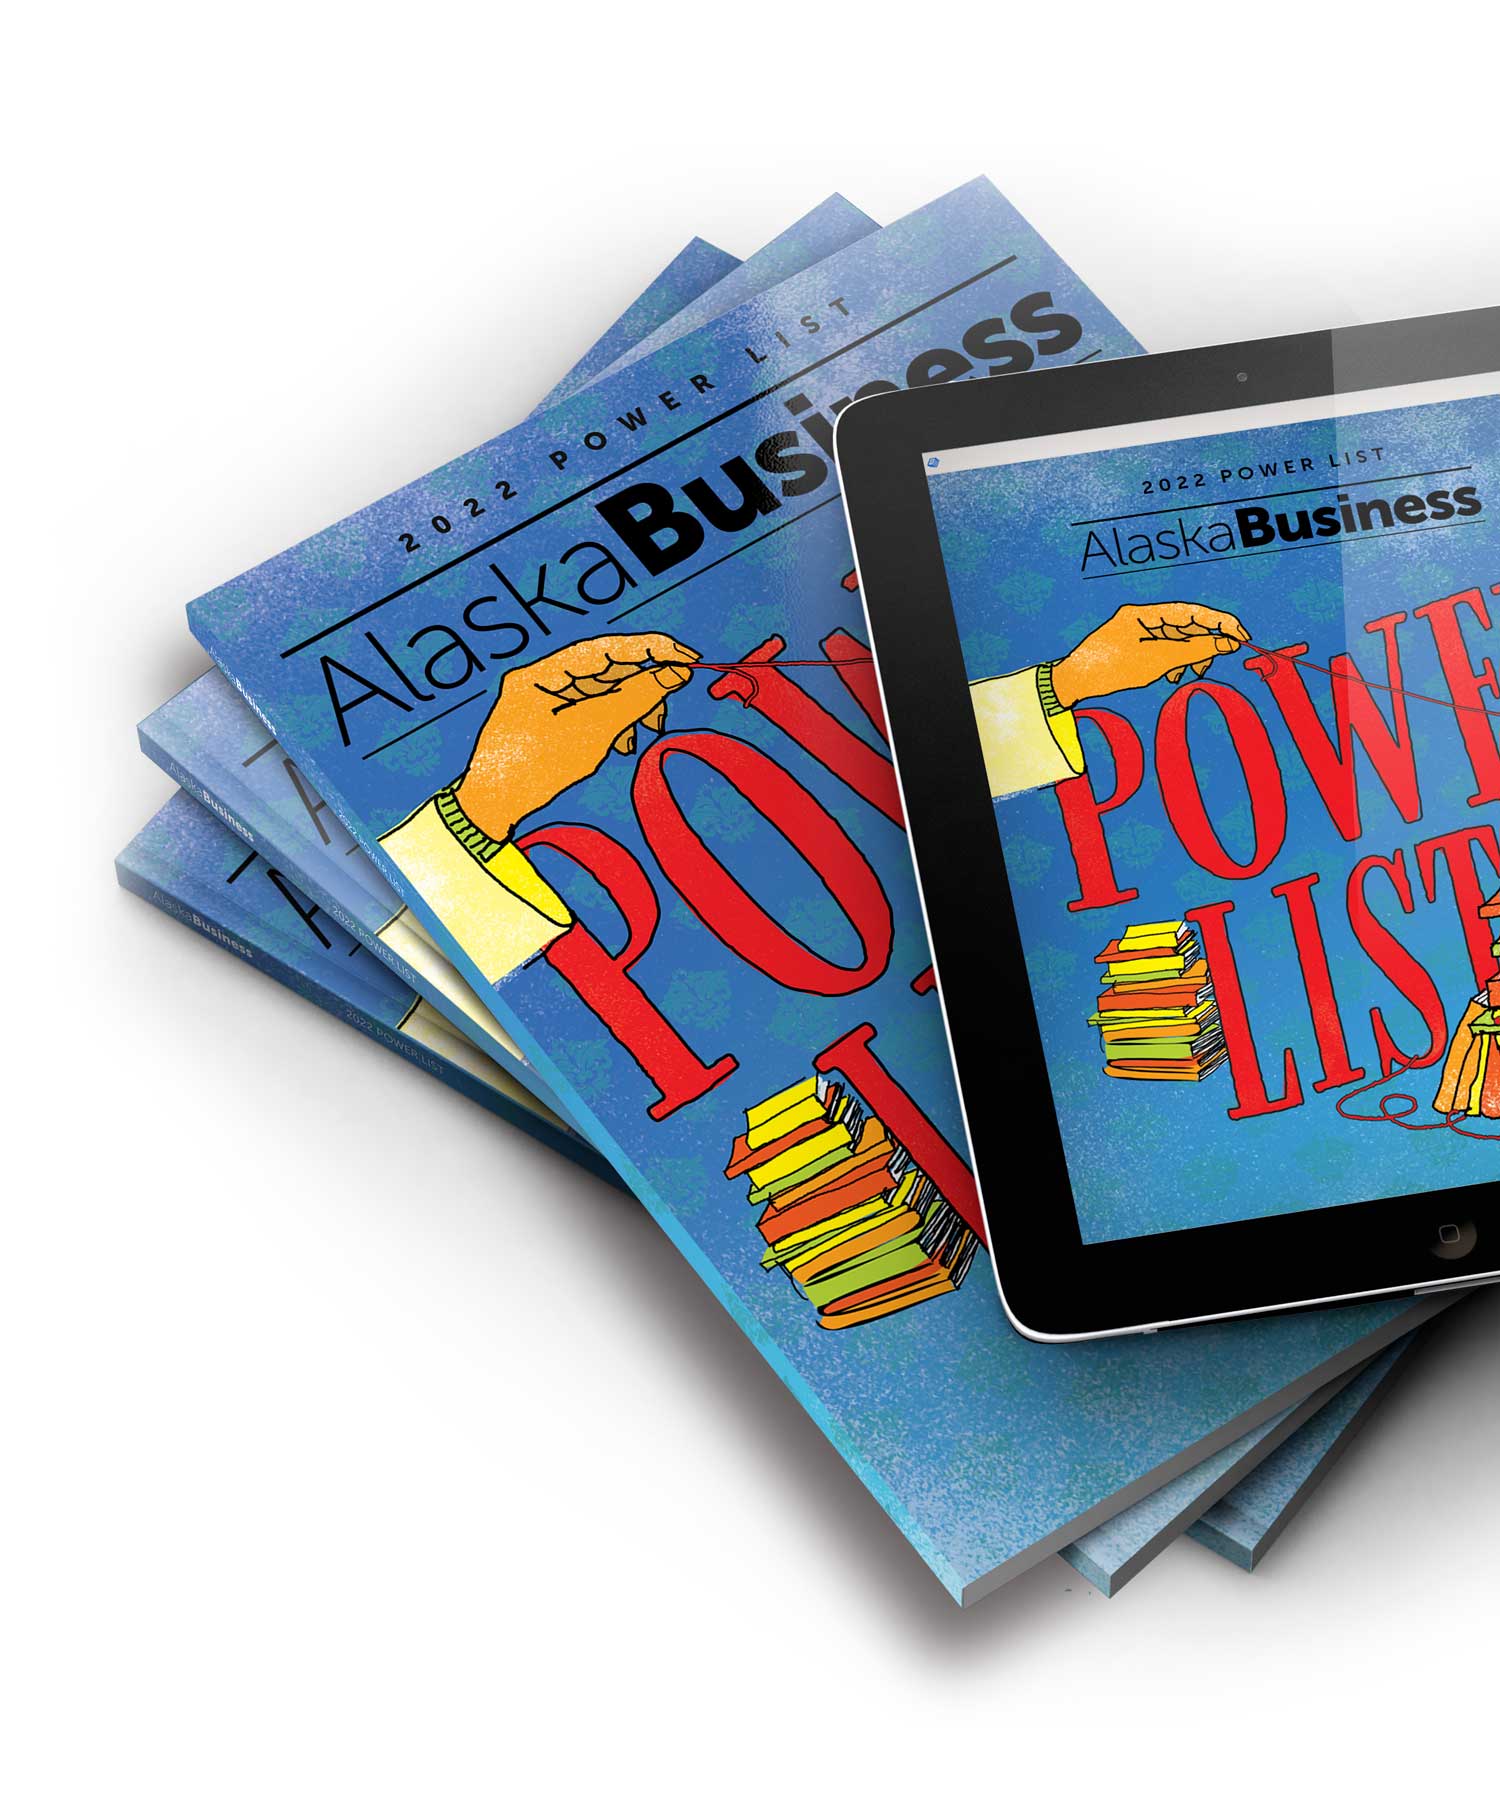 Power List magazine and tablet